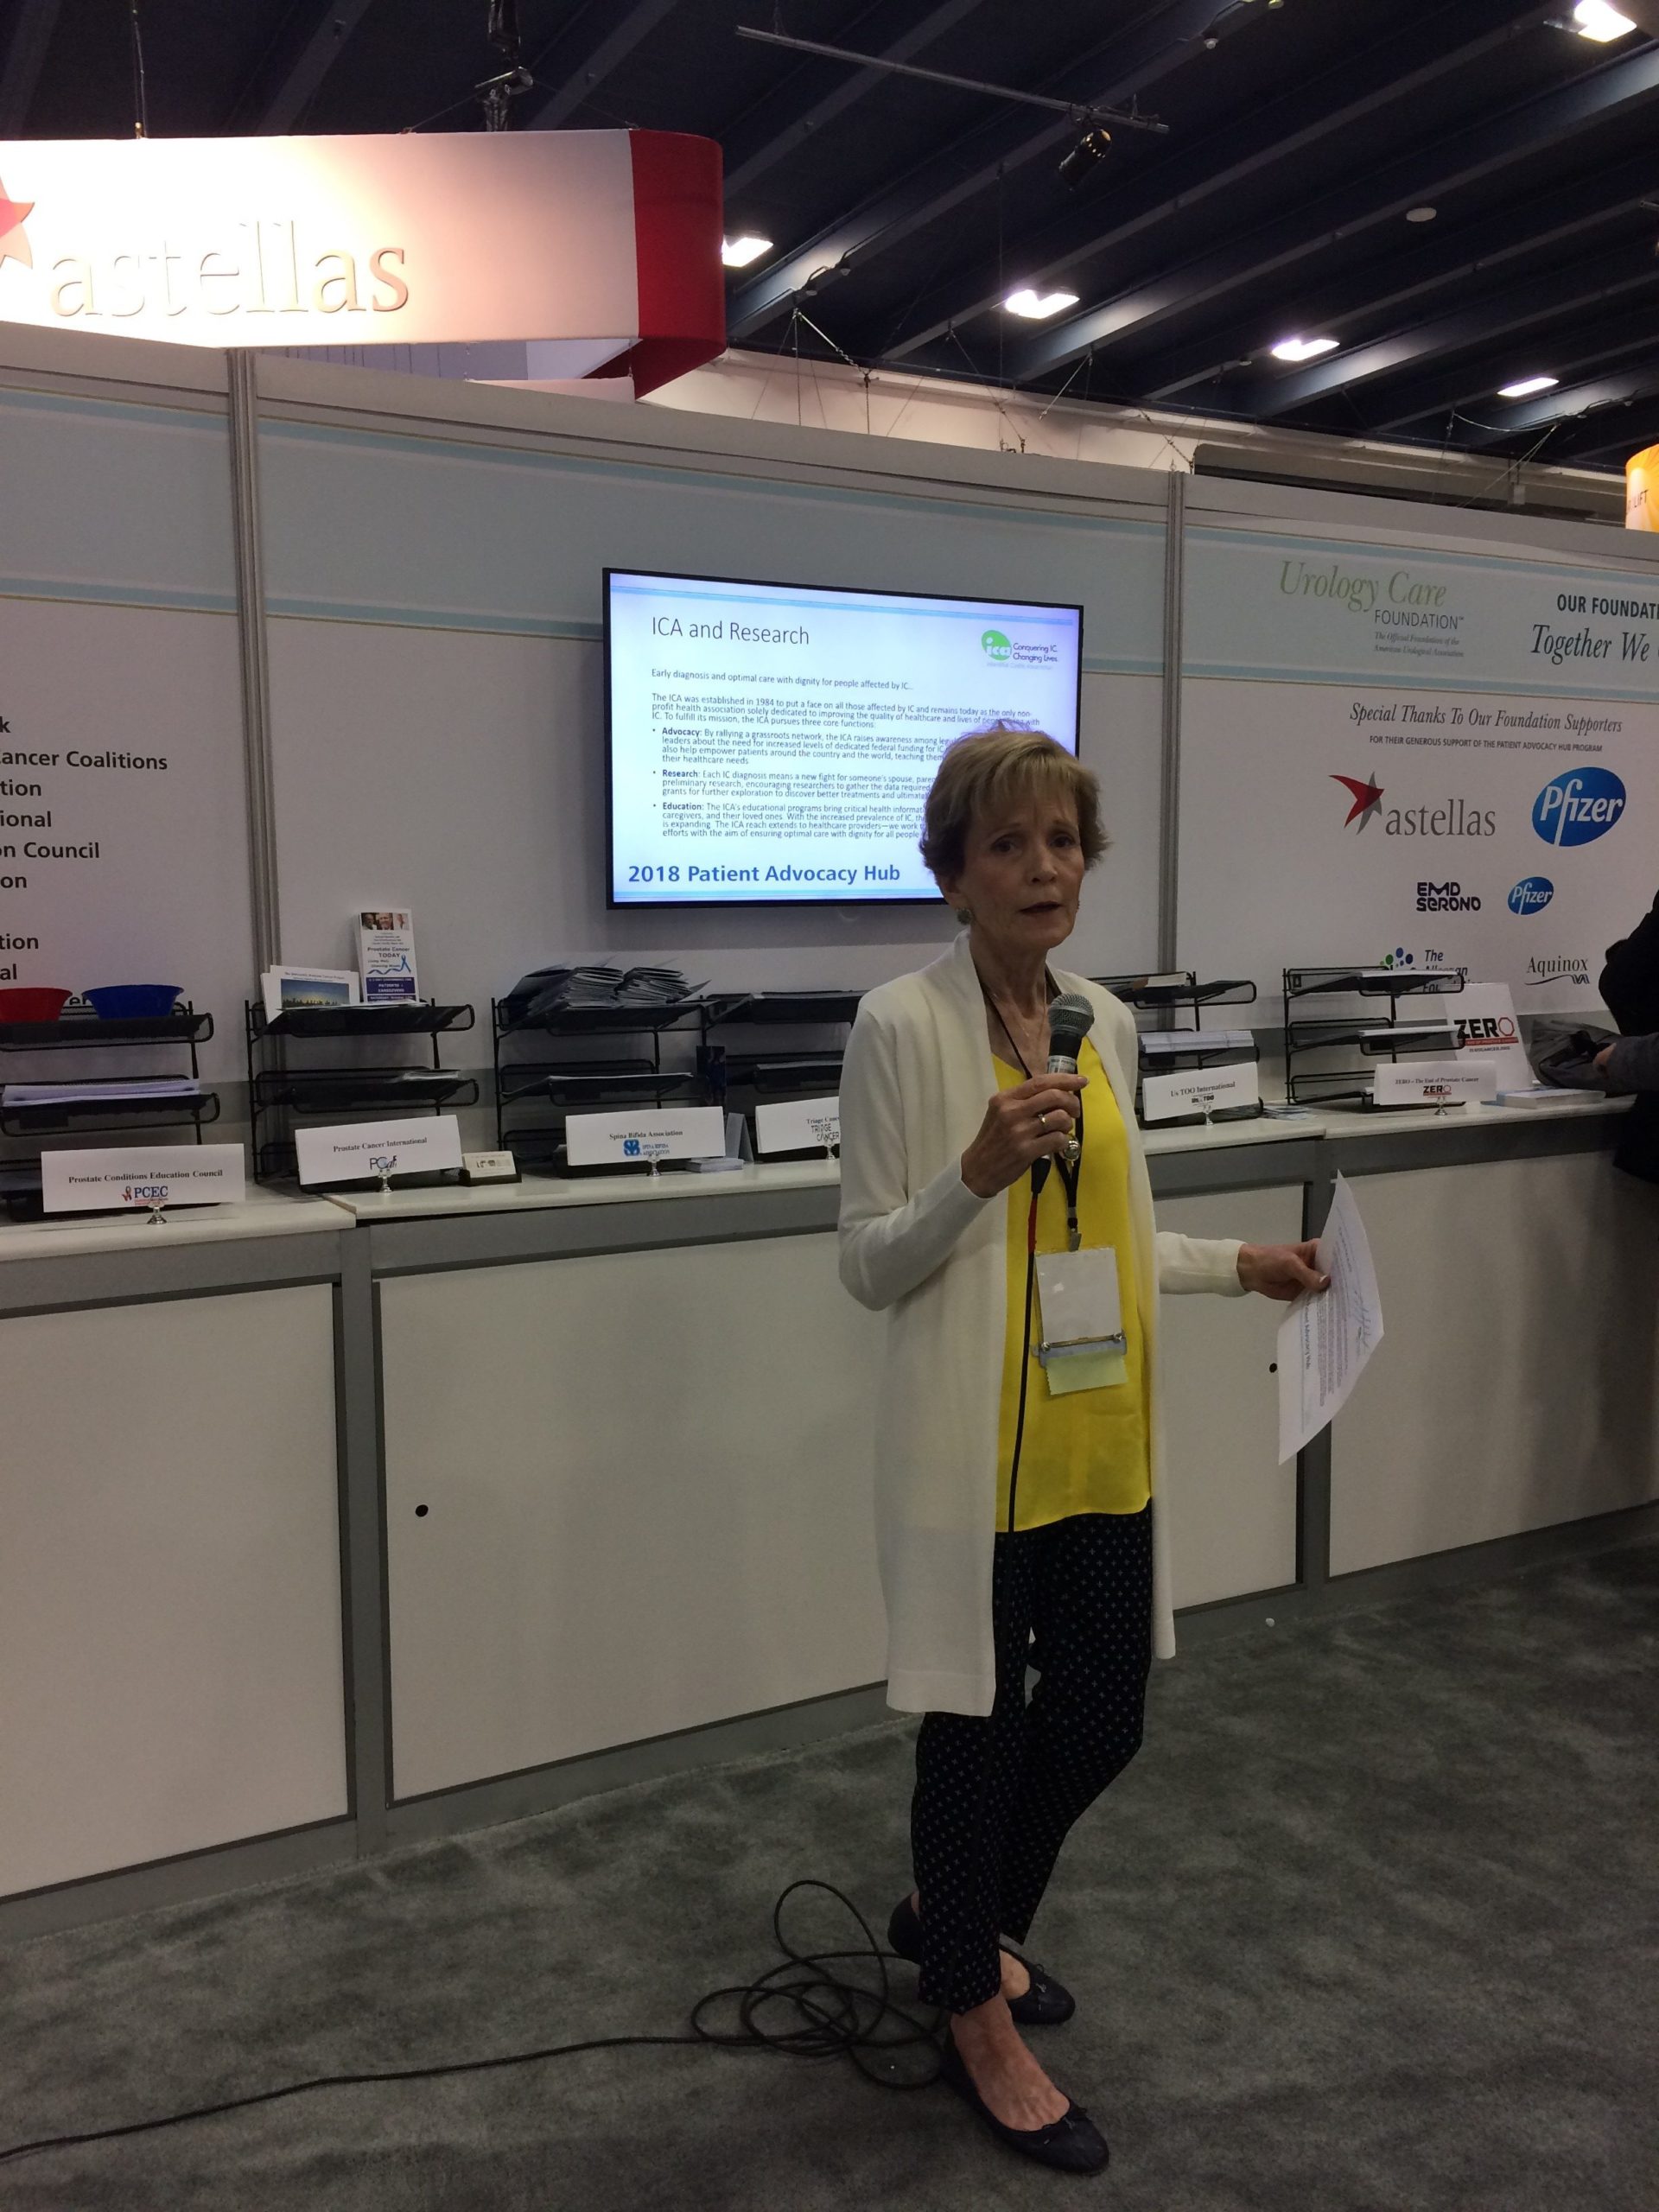 Barb Zarnikow presenting on behalf of ICA at the AUA Patient Advocacy Hub